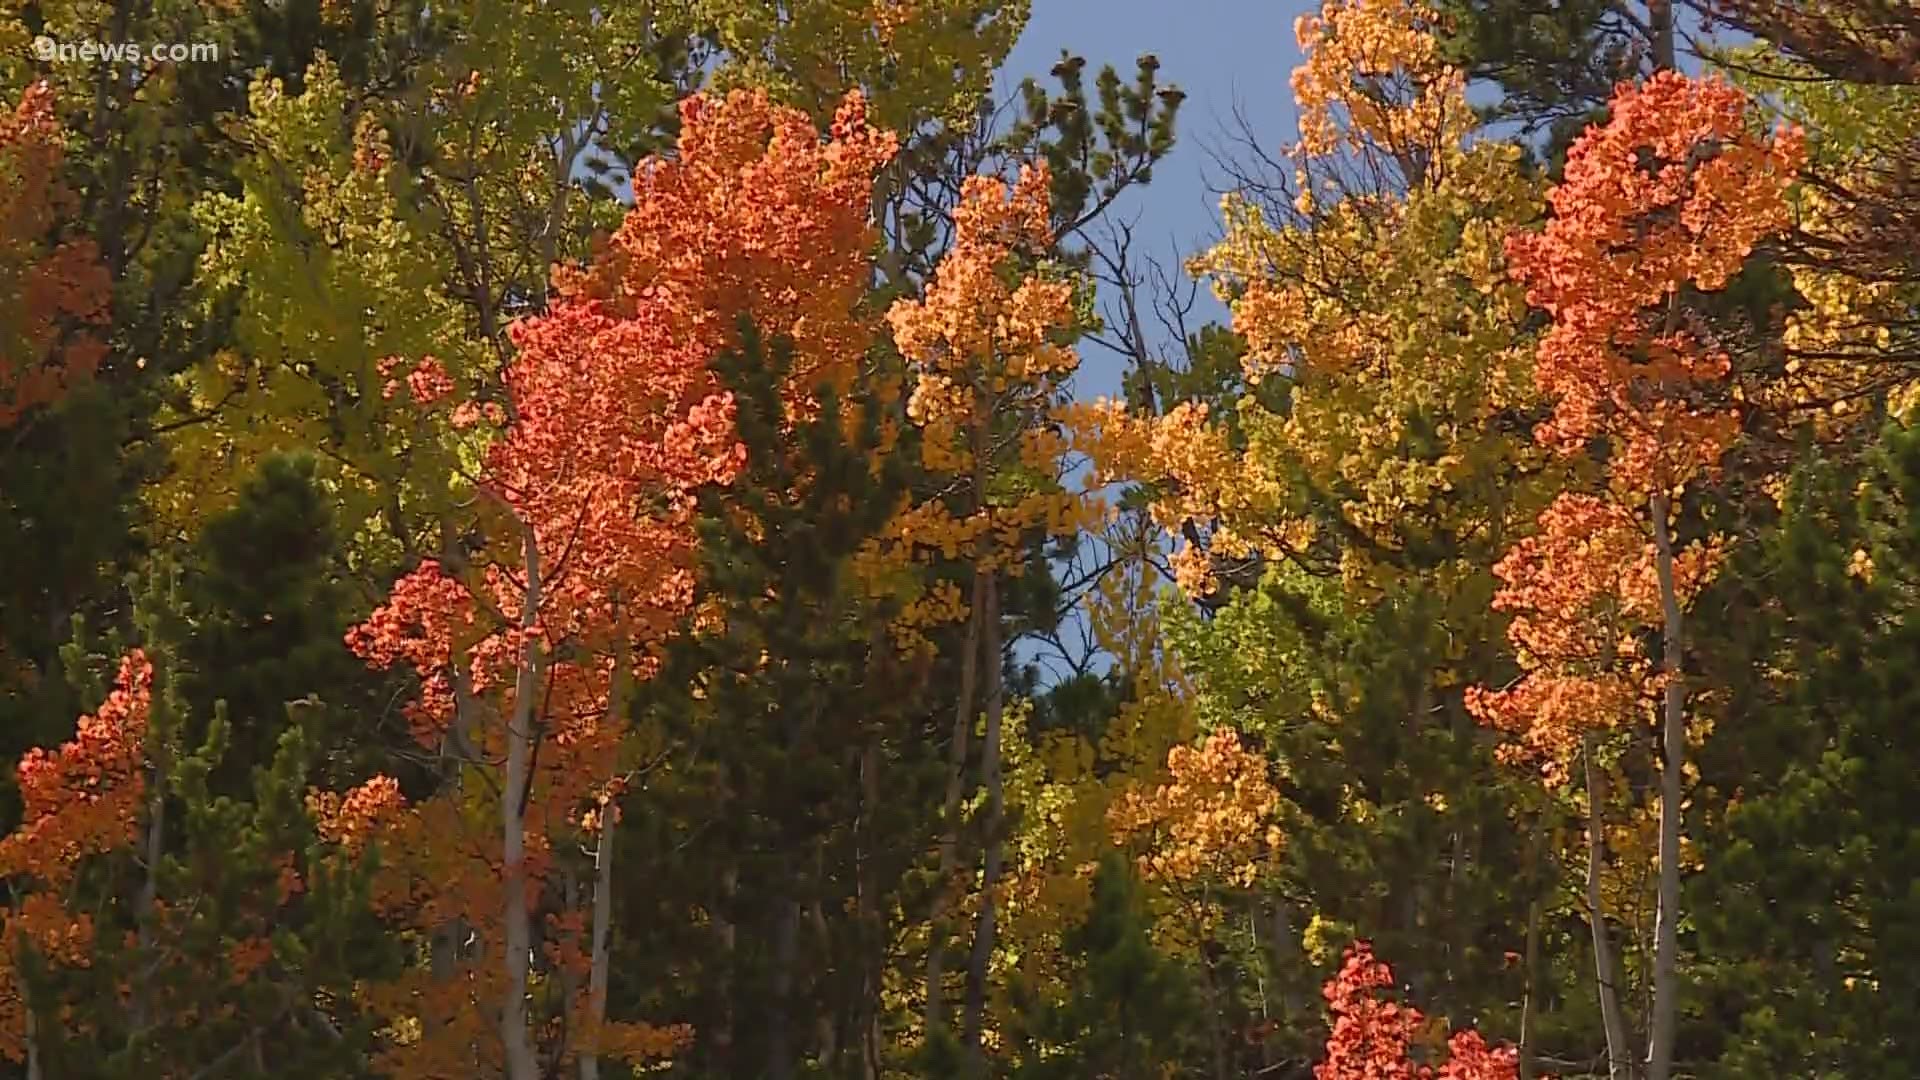 Hot, dry conditions could determine when Colorado sees the brightest colors in aspen groves.